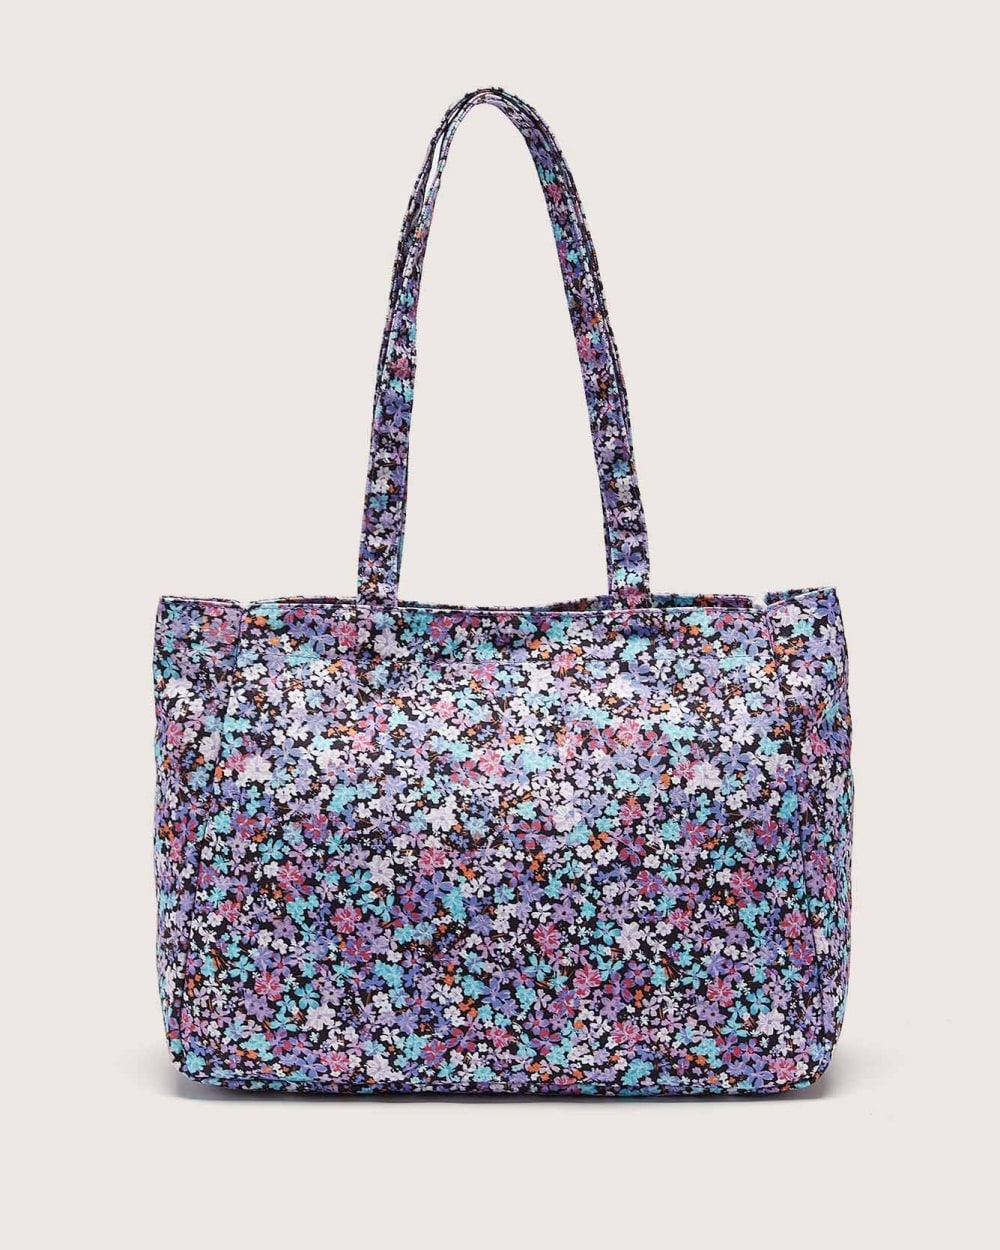 Floral Tote with Removable Clear Pouch